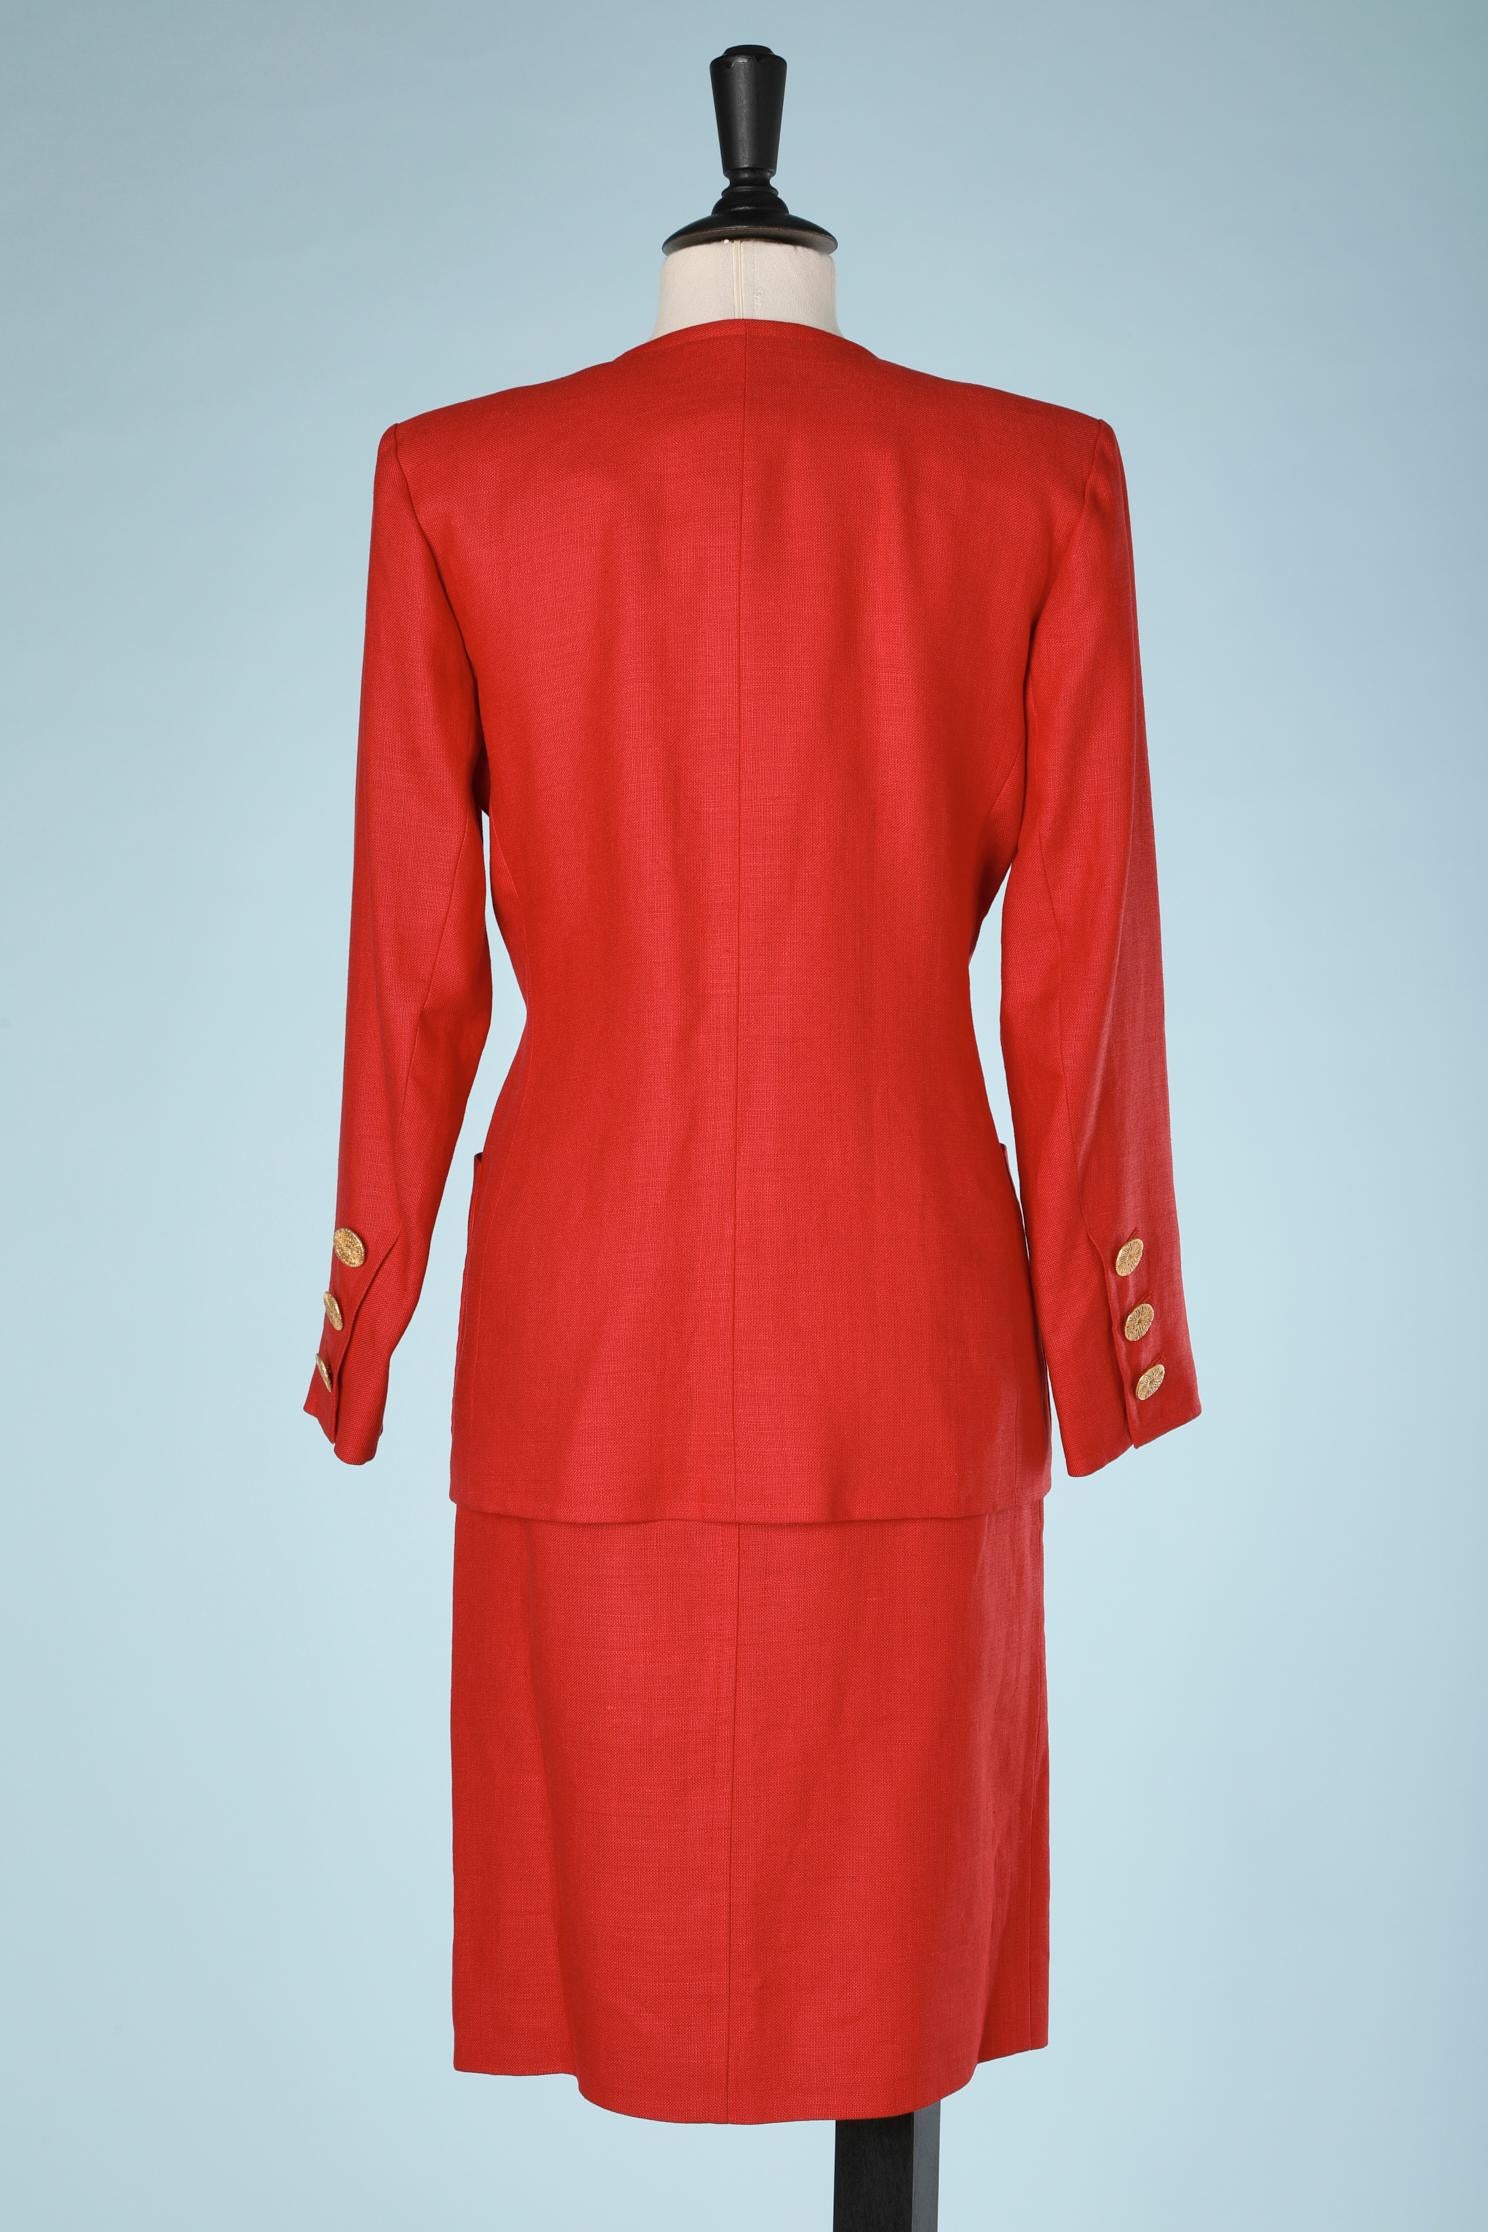 Red linen skirt-suit with jewlerry buttons Yves Saint Laurent Rive Gauche SS1992 For Sale 1